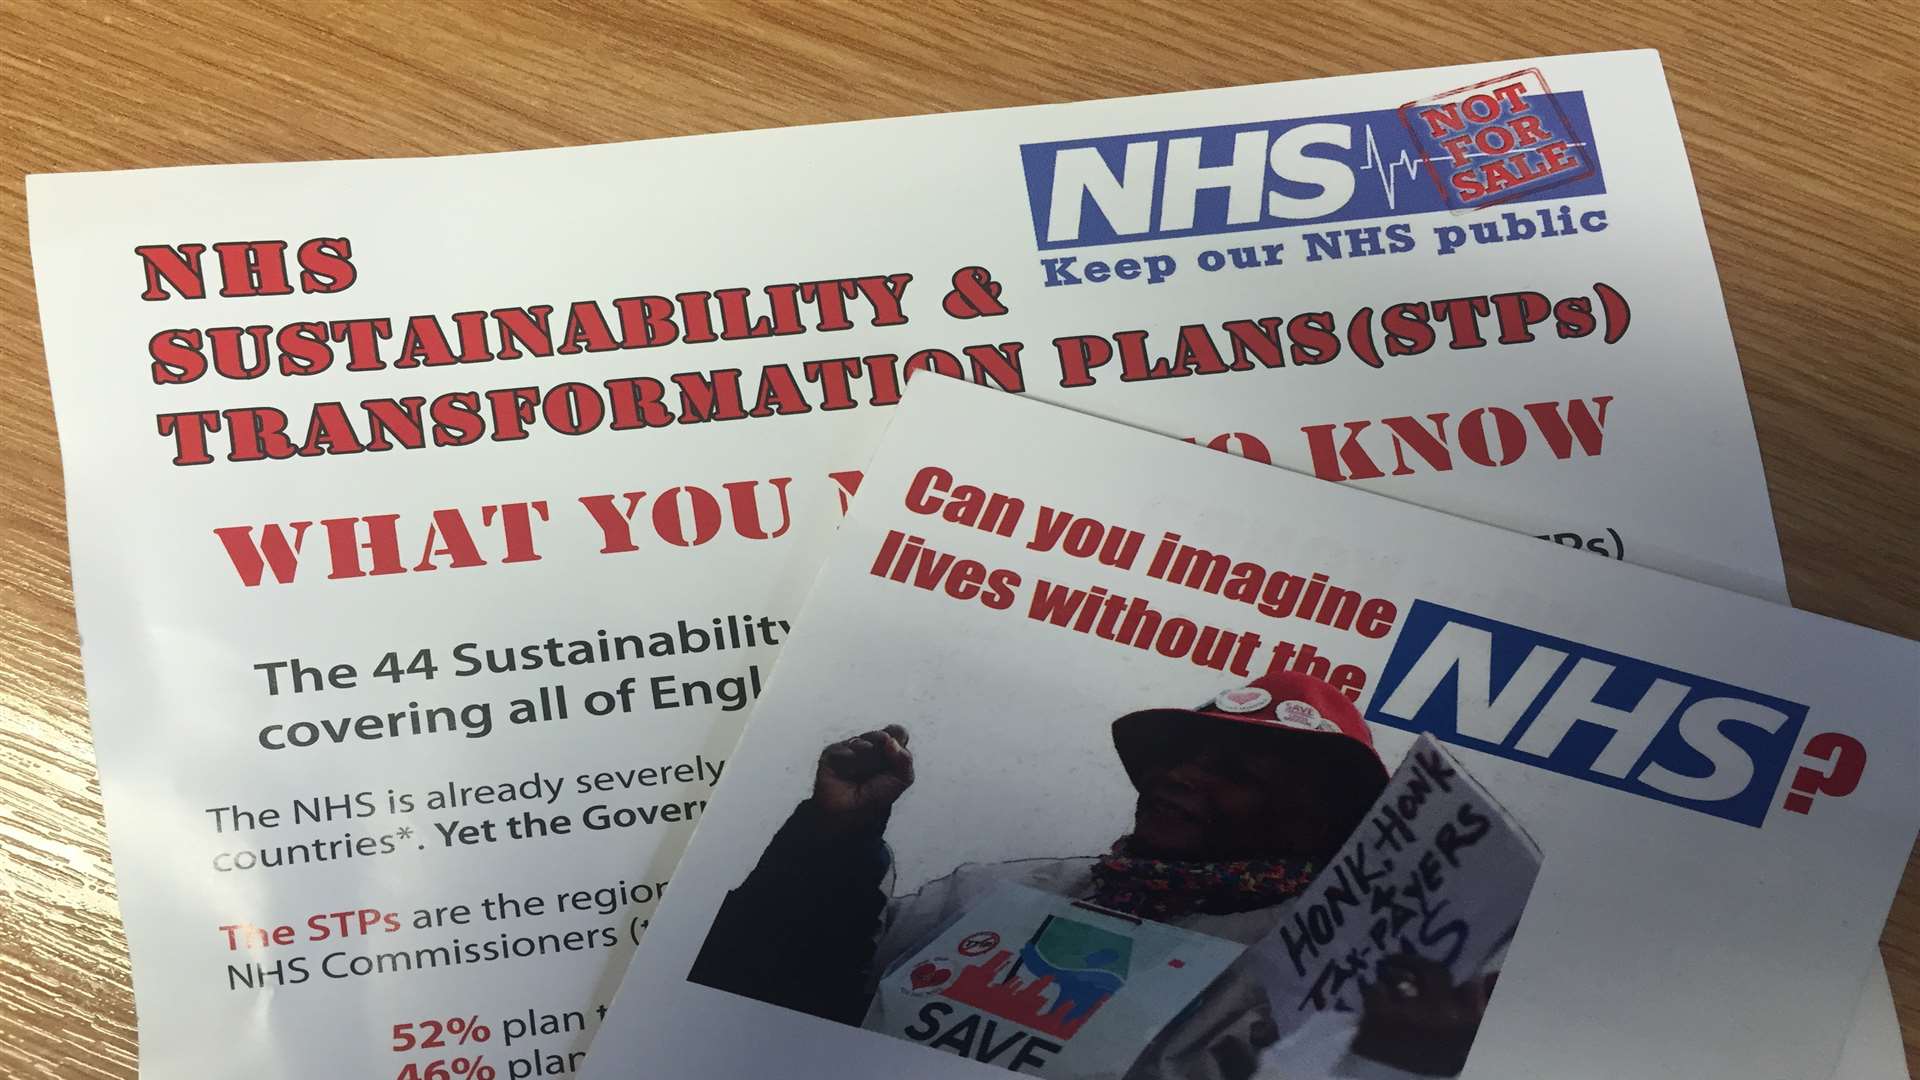 The meeting discussed the NHS Sustainability and Transformation Plans